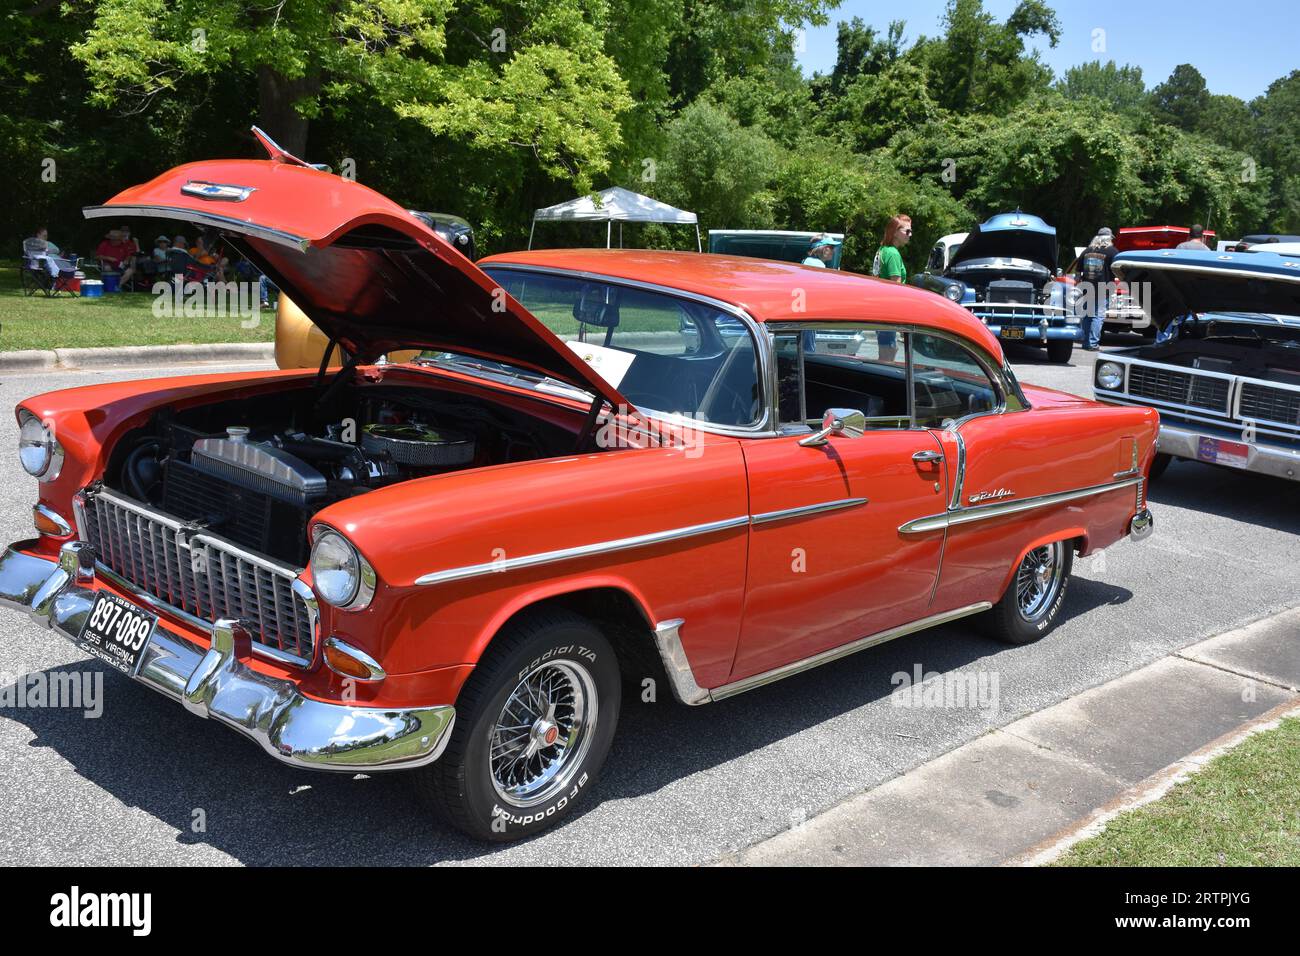 A 1955 Chevrolet Bel Air Hard Top on display at a car show. Stock Photo